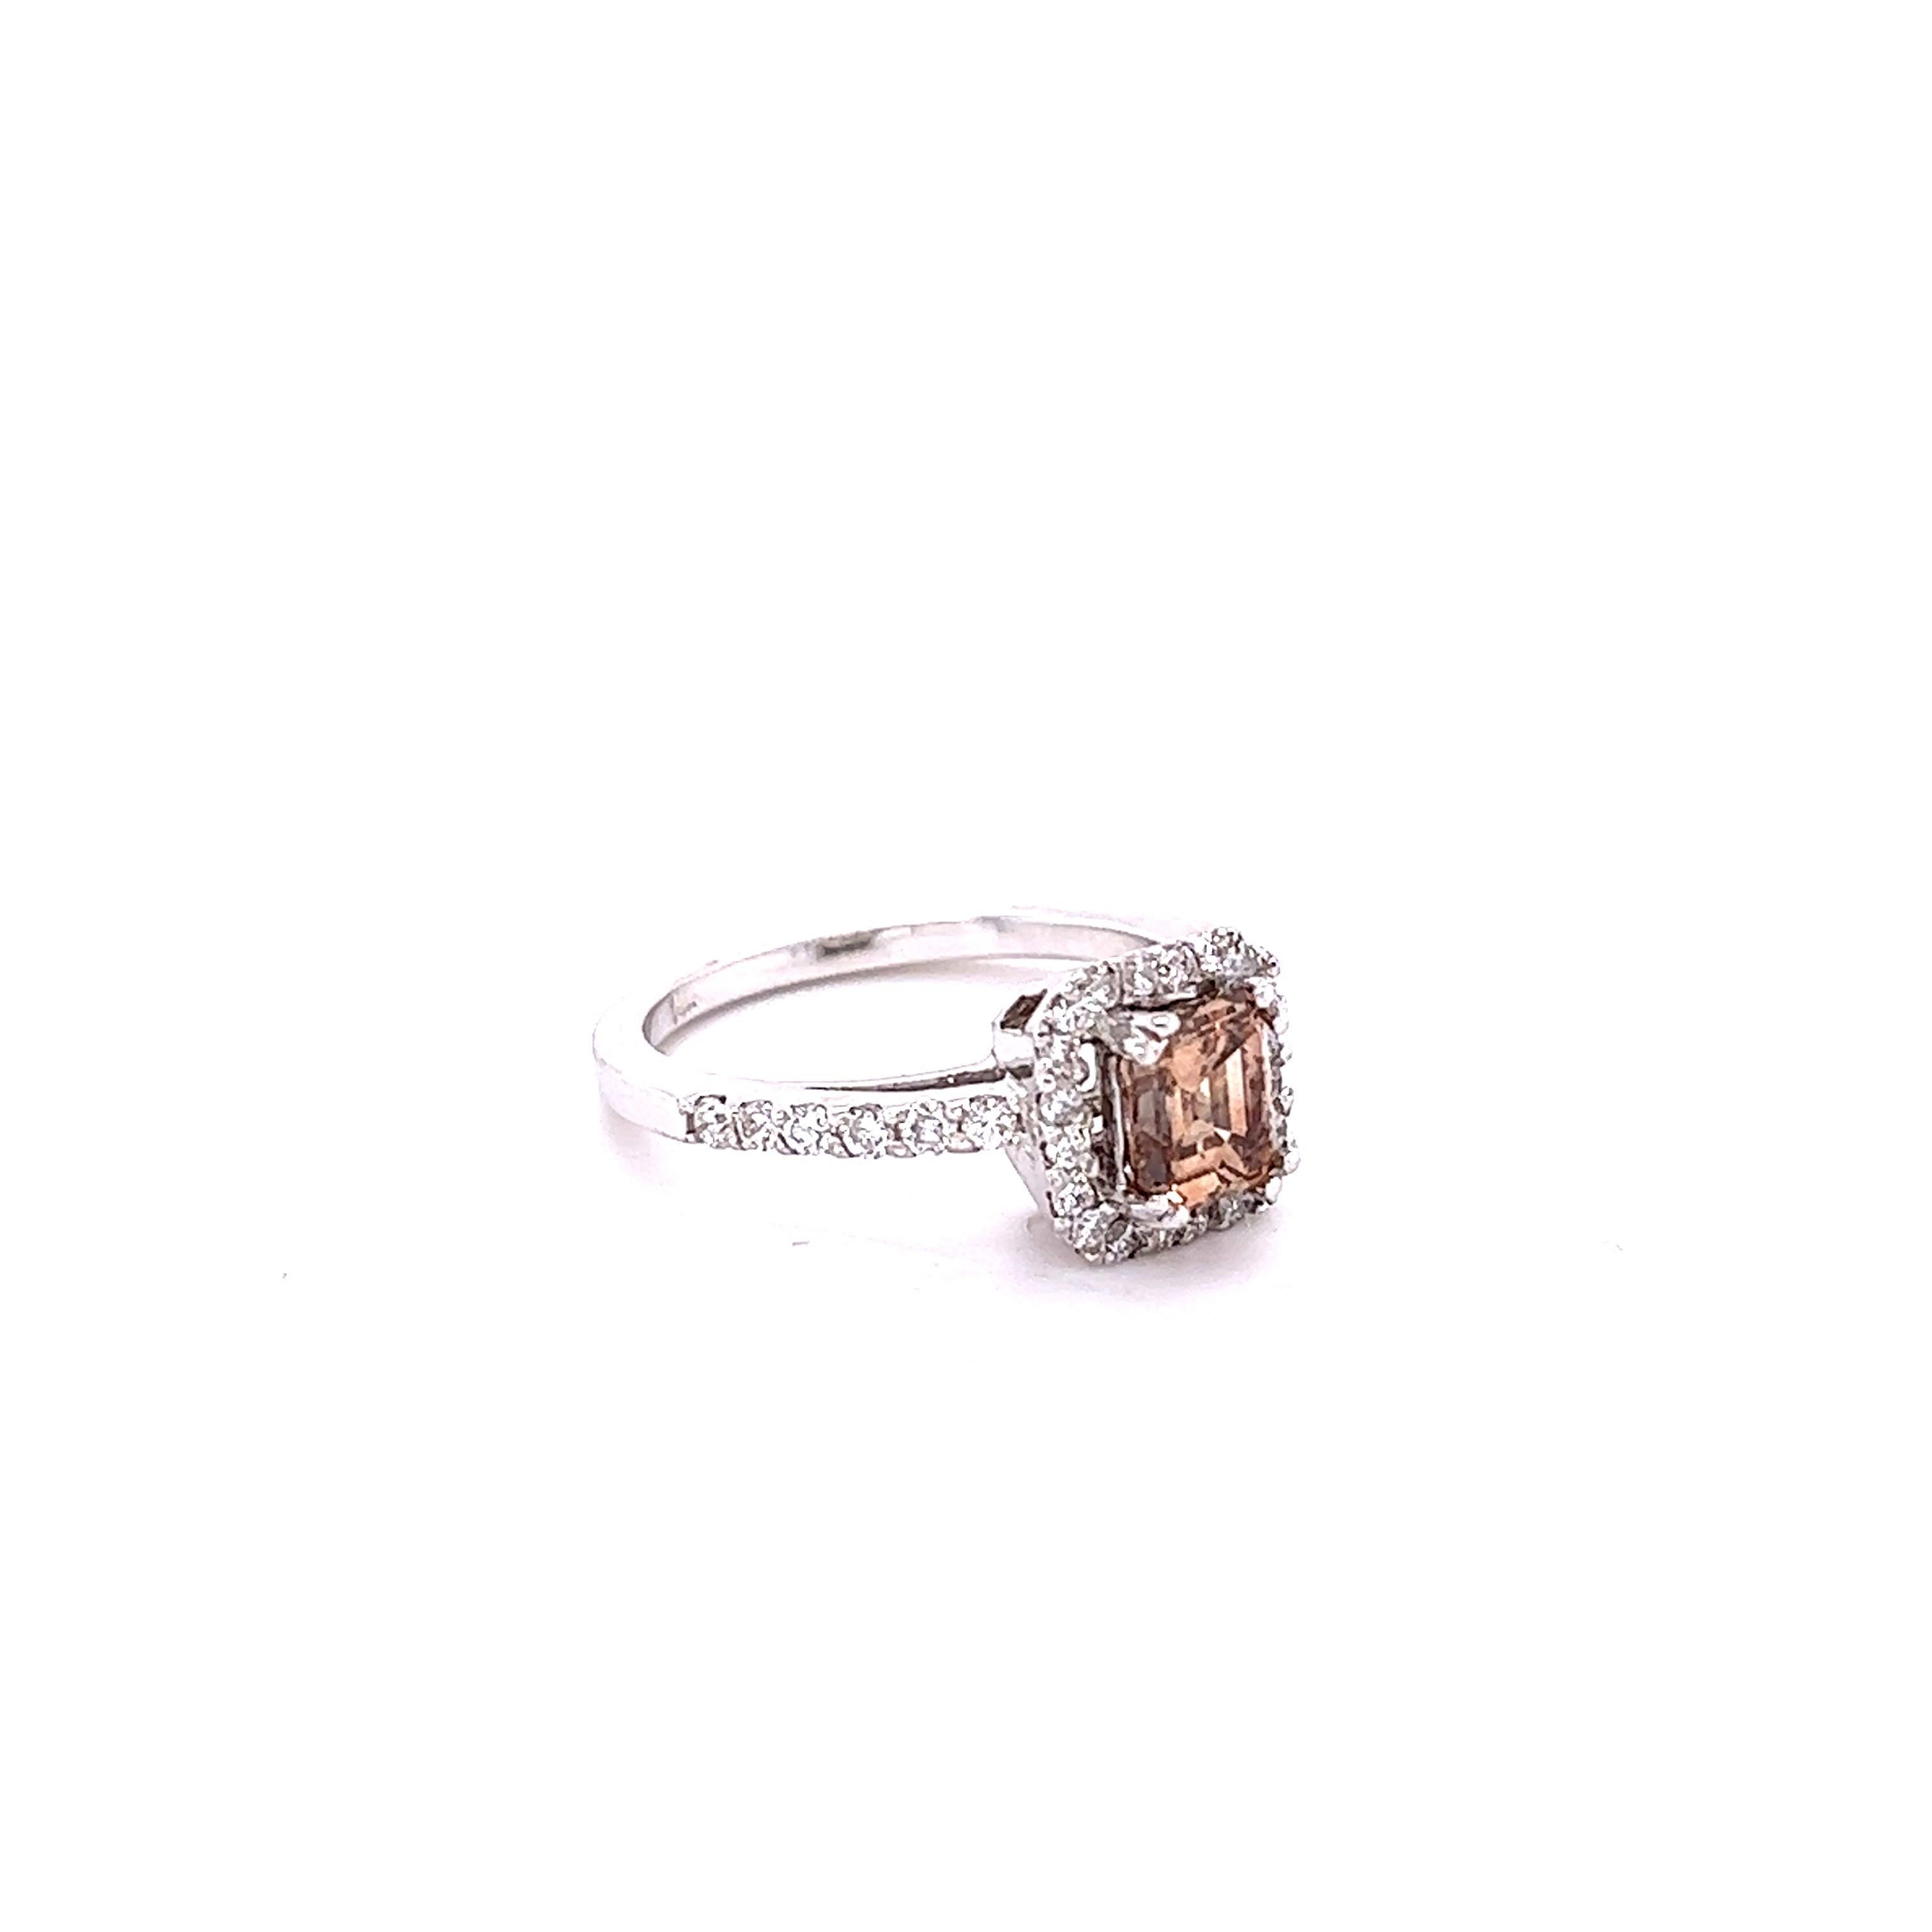 This ring has a Natural Asscher Cut Champagne Brown Diamond that weighs 1.01 carats and it is surrounded by 34 Round Cut White Diamonds that weigh 0.48 carats. Clarity: VS, Color: F
The center champagne diamond measures at 6 mm x 5 mm. 
The total